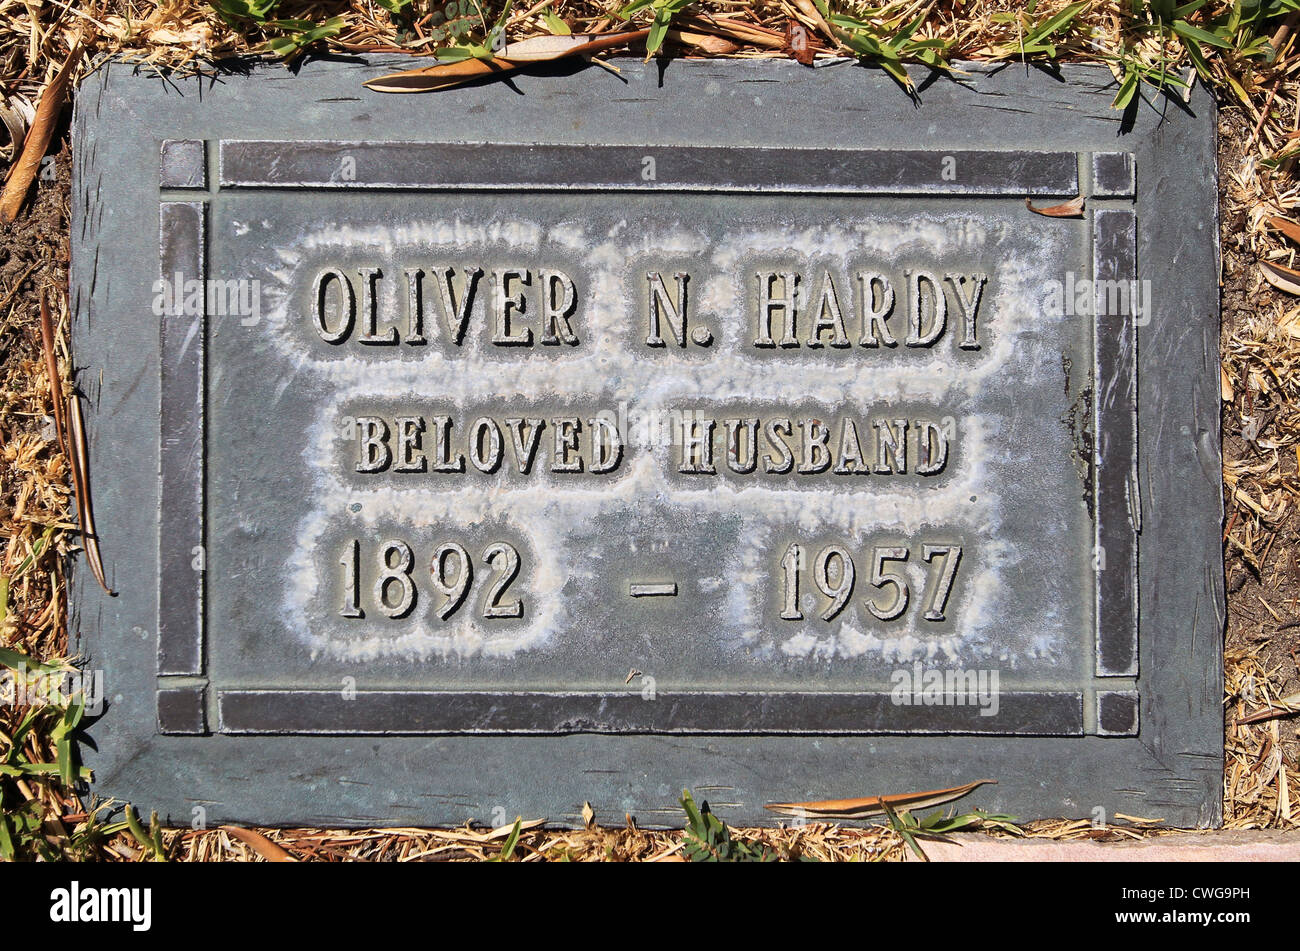 The Final Resting Place Of Oliver Hardy And Memorial Plaque Stock Photo Alamy